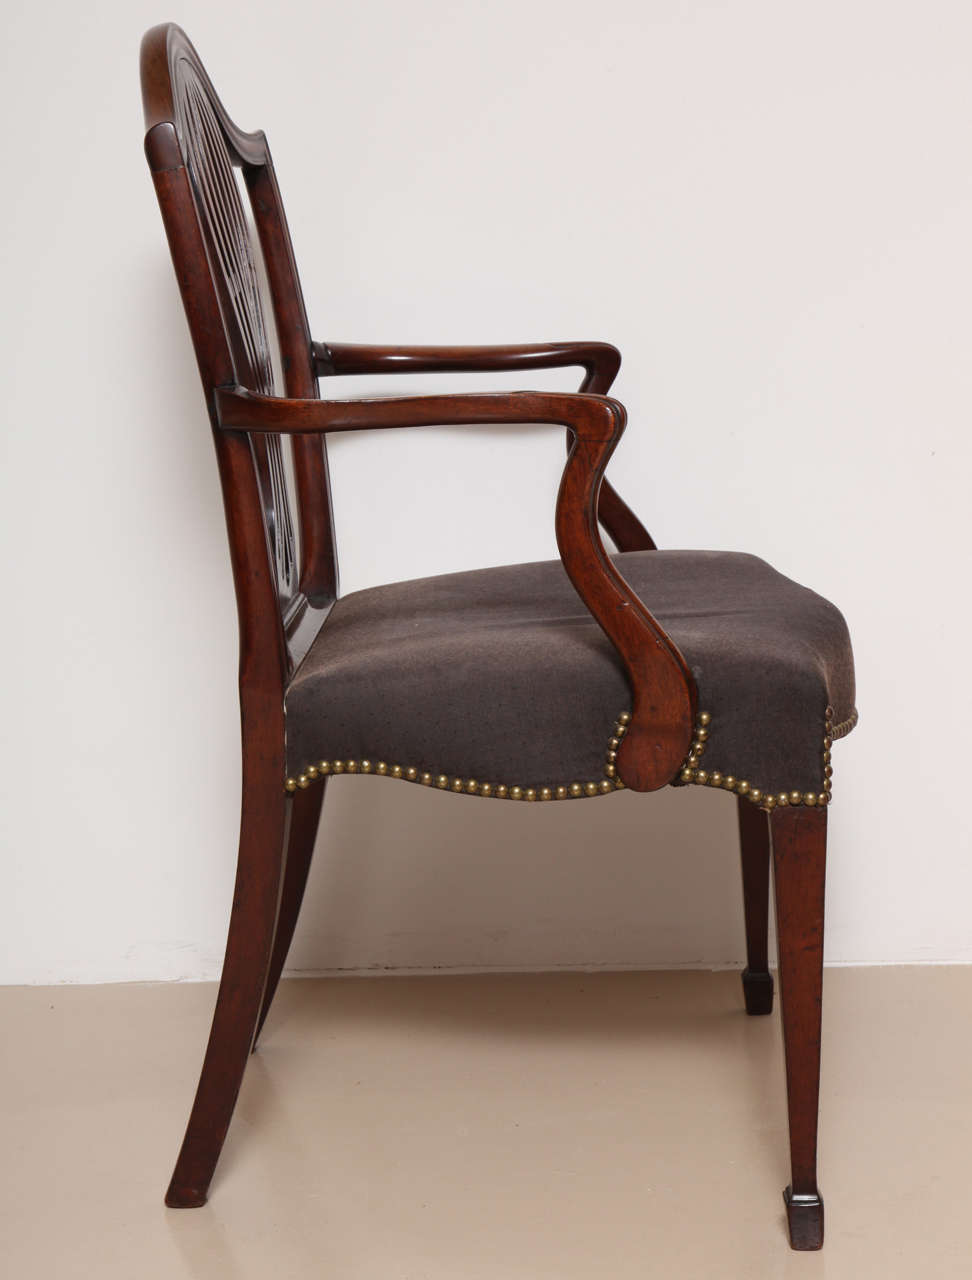 Late 18th Century George III Mahogany Armchair in the Manner of Hepplewhite